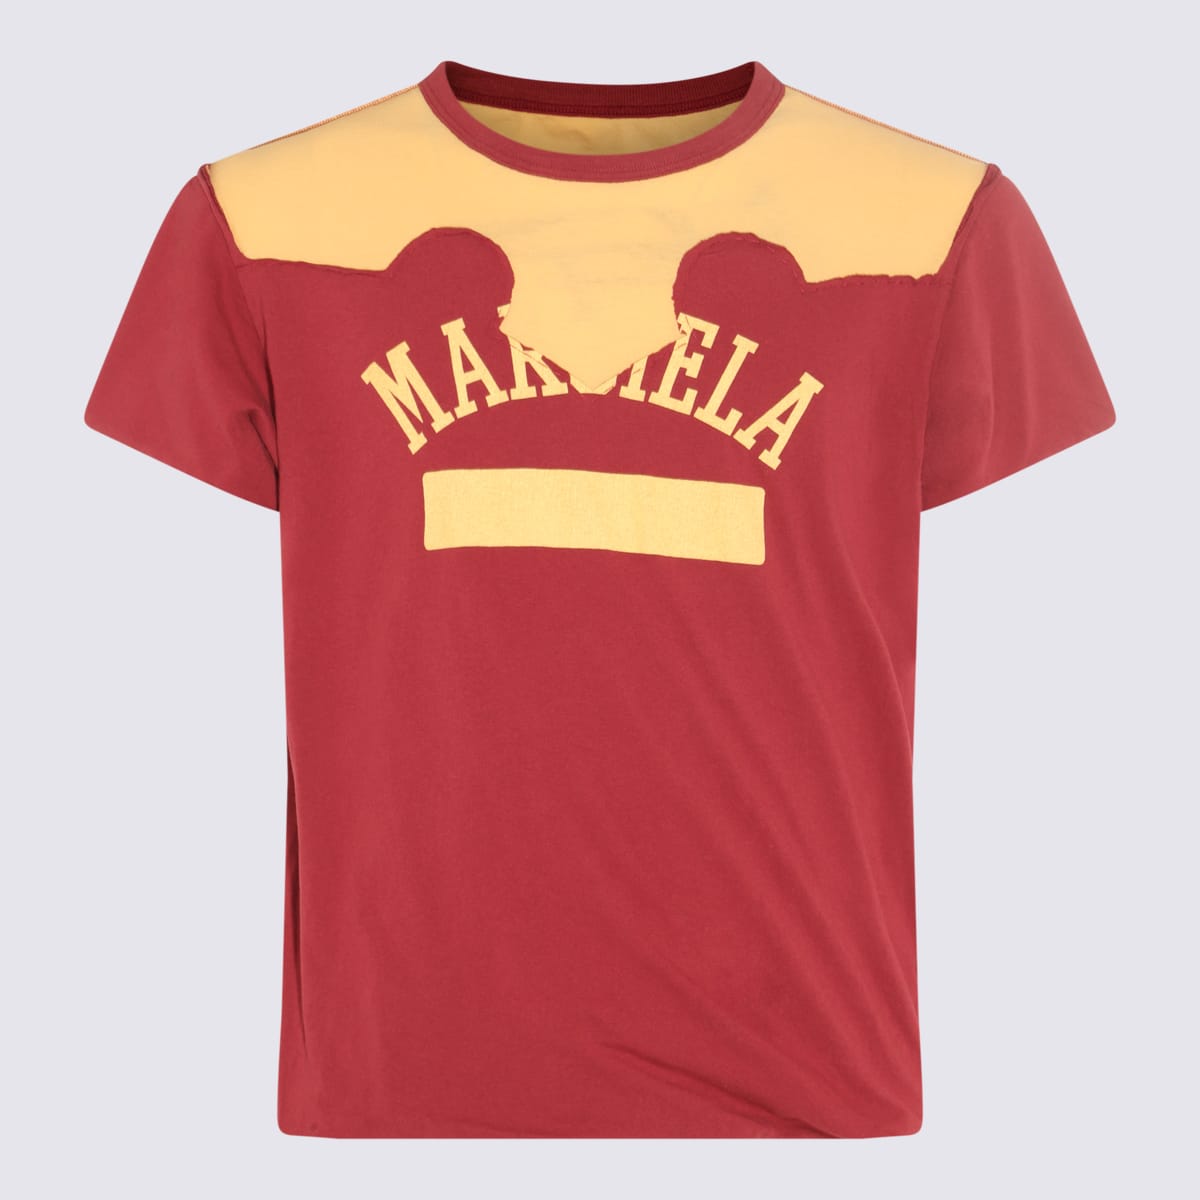 MAISON MARGIELA RED AND YELLOW COTTON DECORTIQUE T-SHIRT